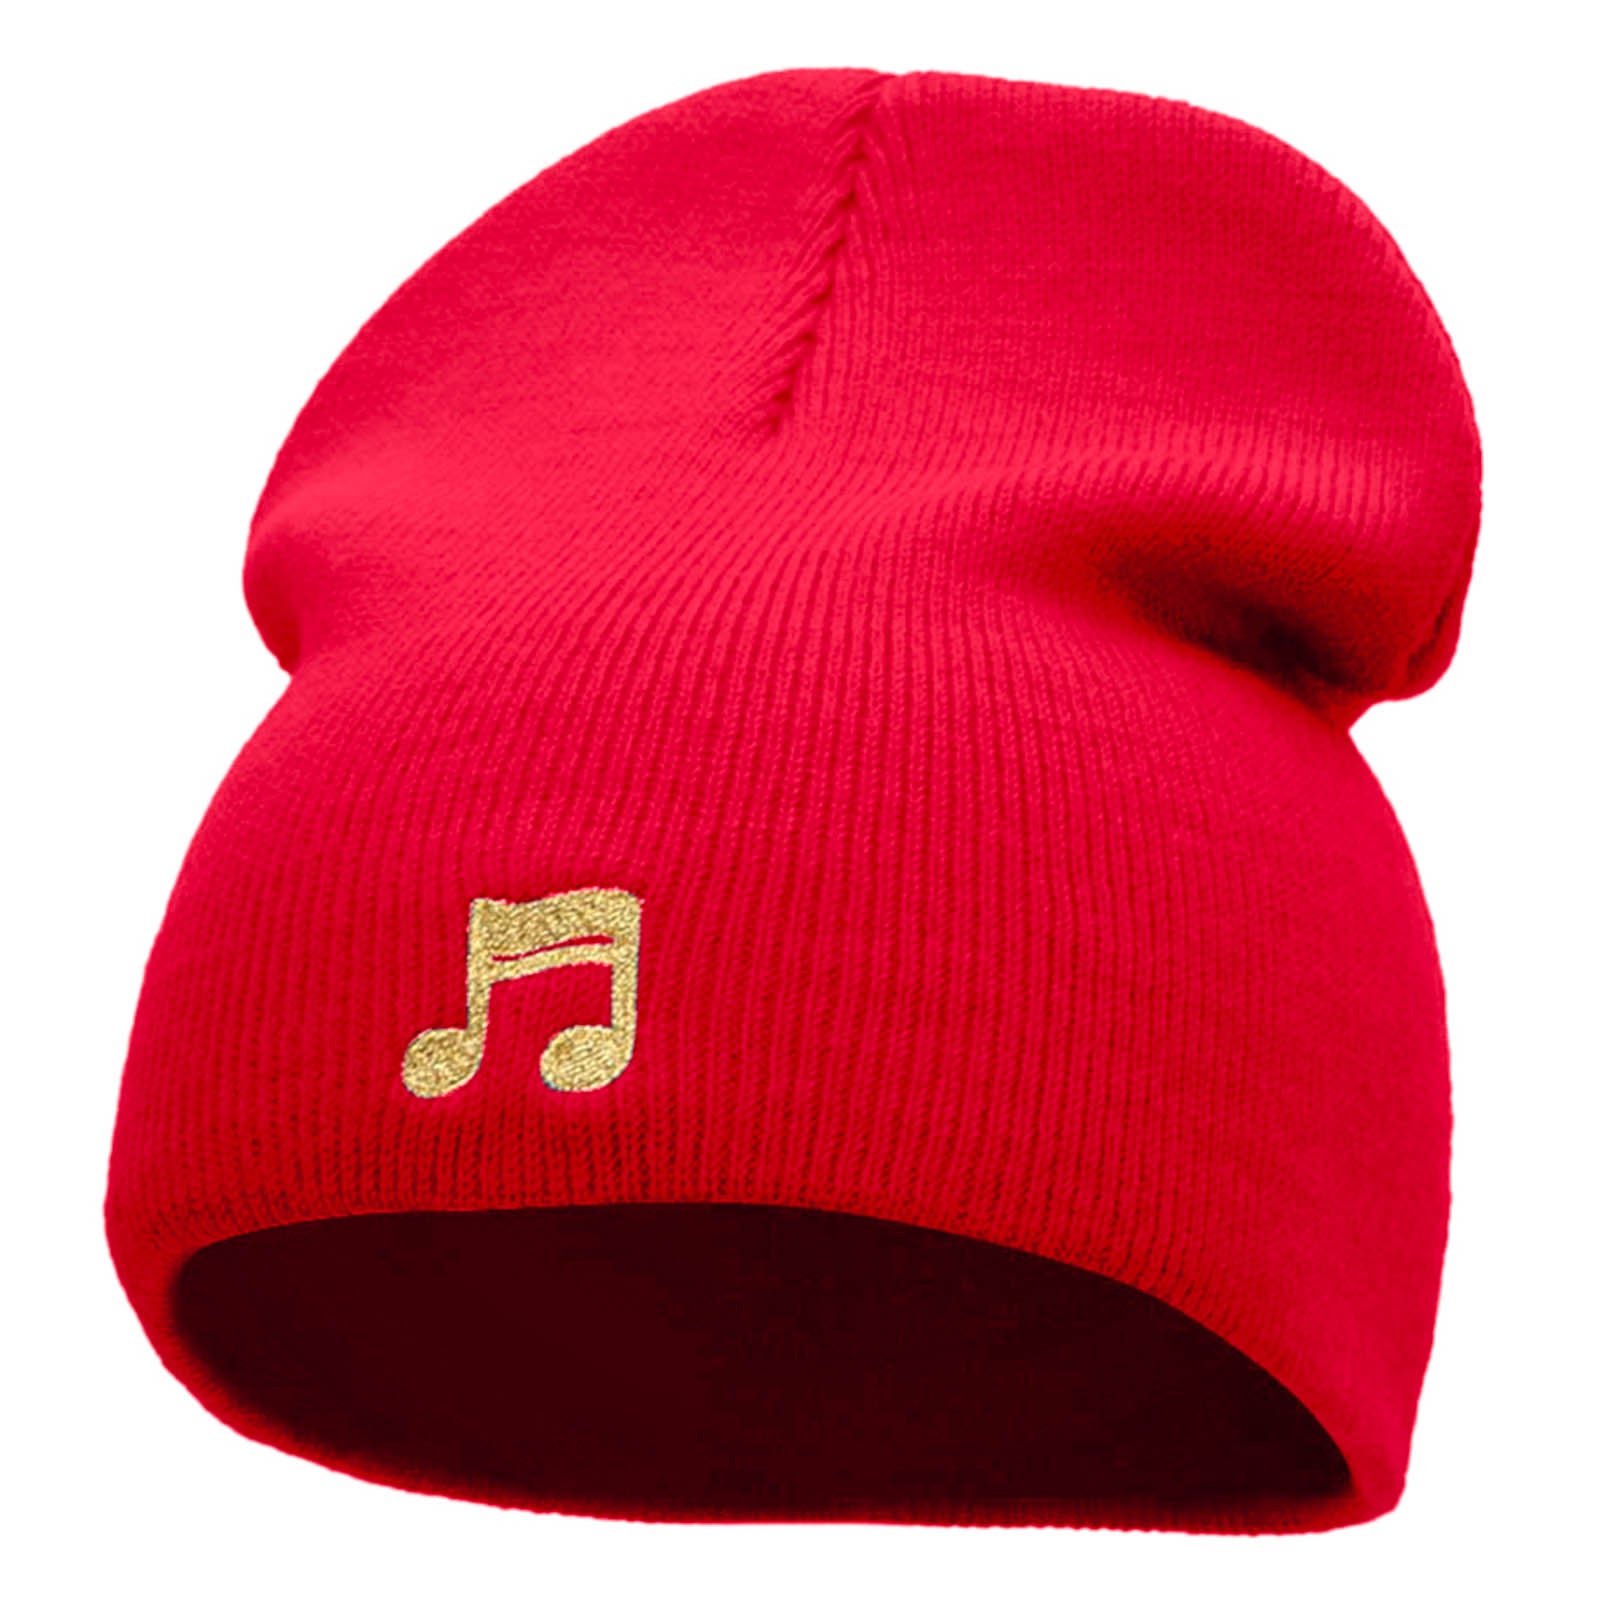 Beamed 16th Note Embroidered Short Beanie - Red OSFM